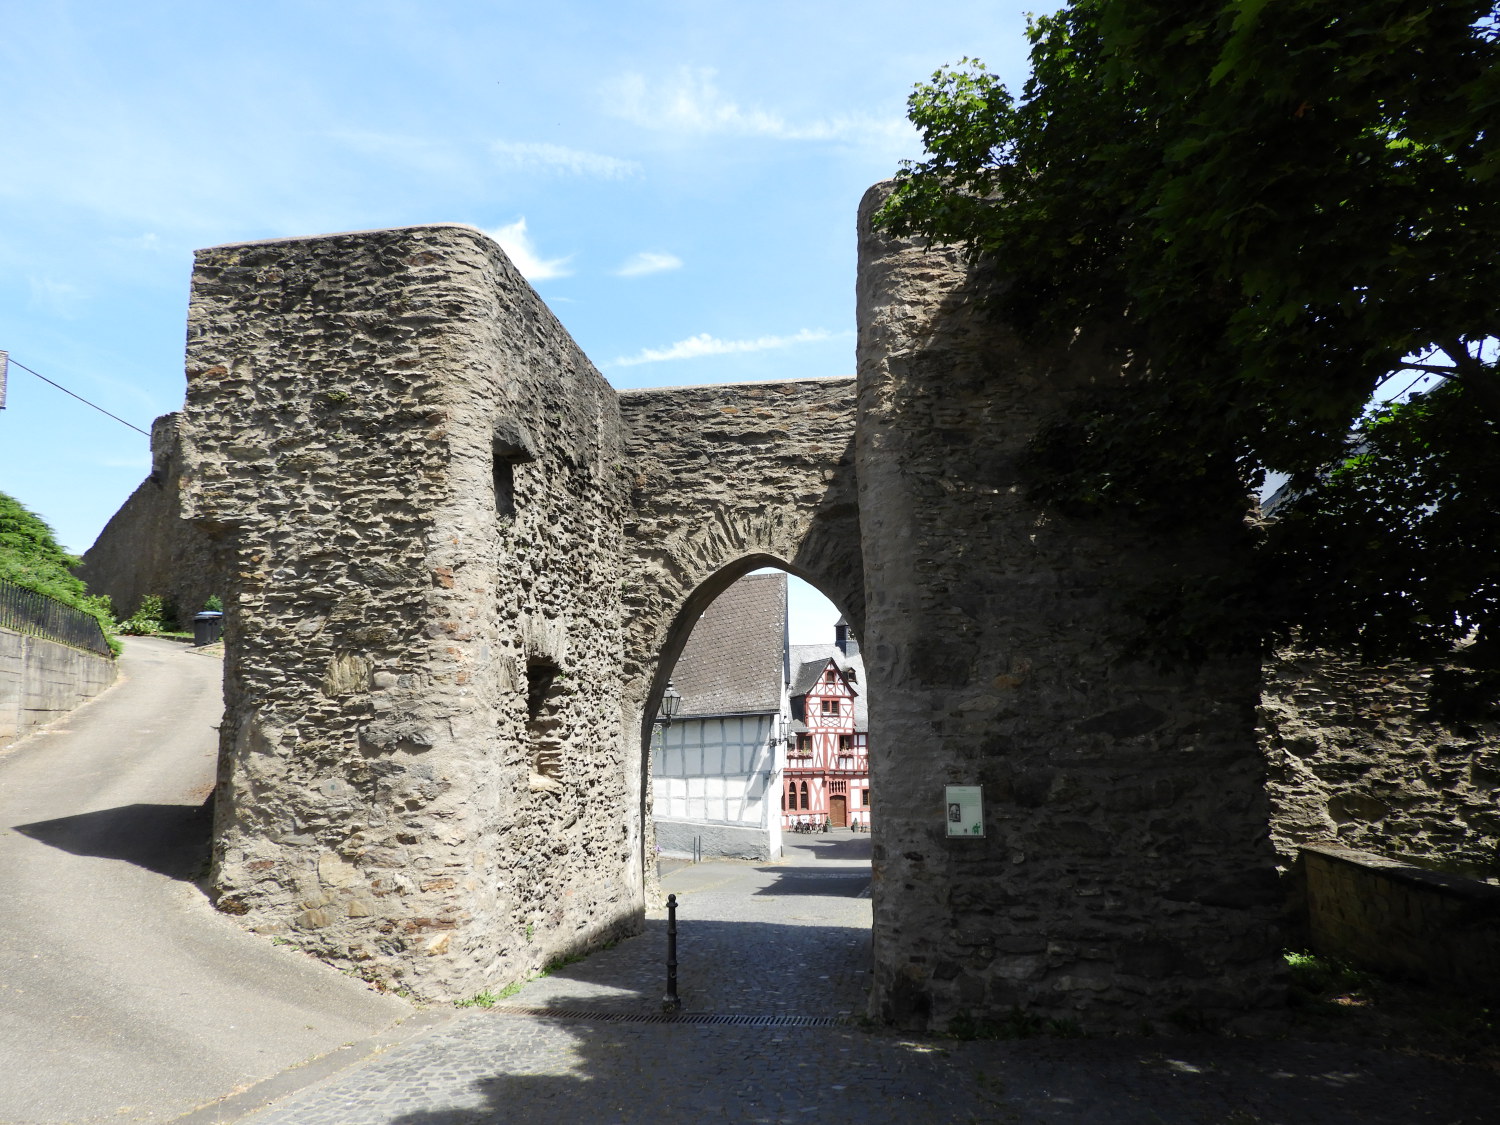 Old town entry gate at Rhens